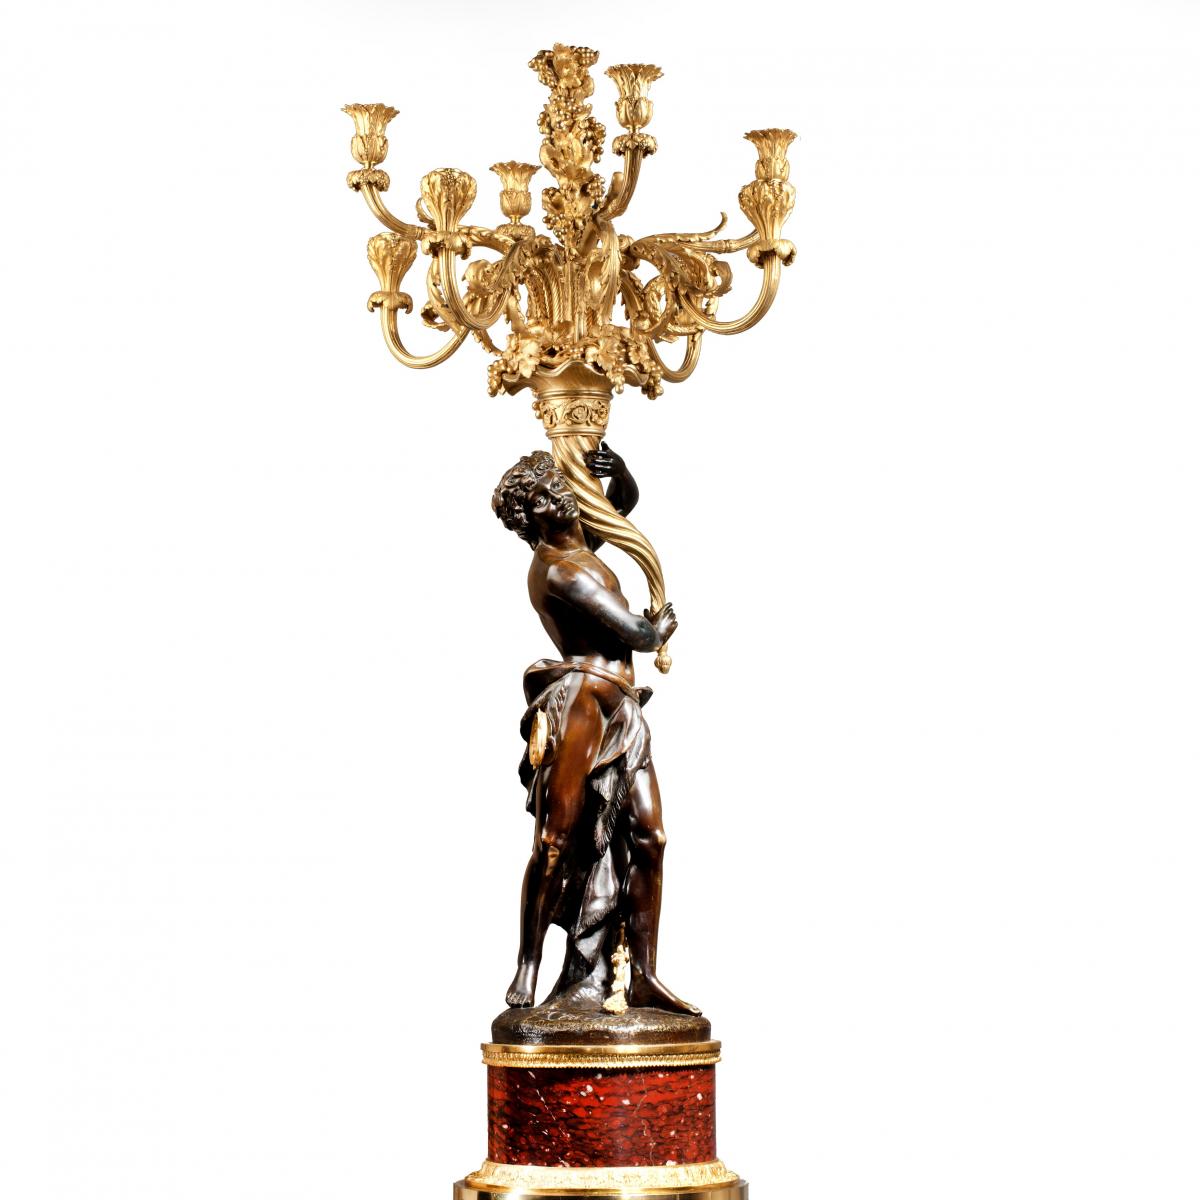 A Magnificent Pair of Louis XVI Candelabra after Clodion